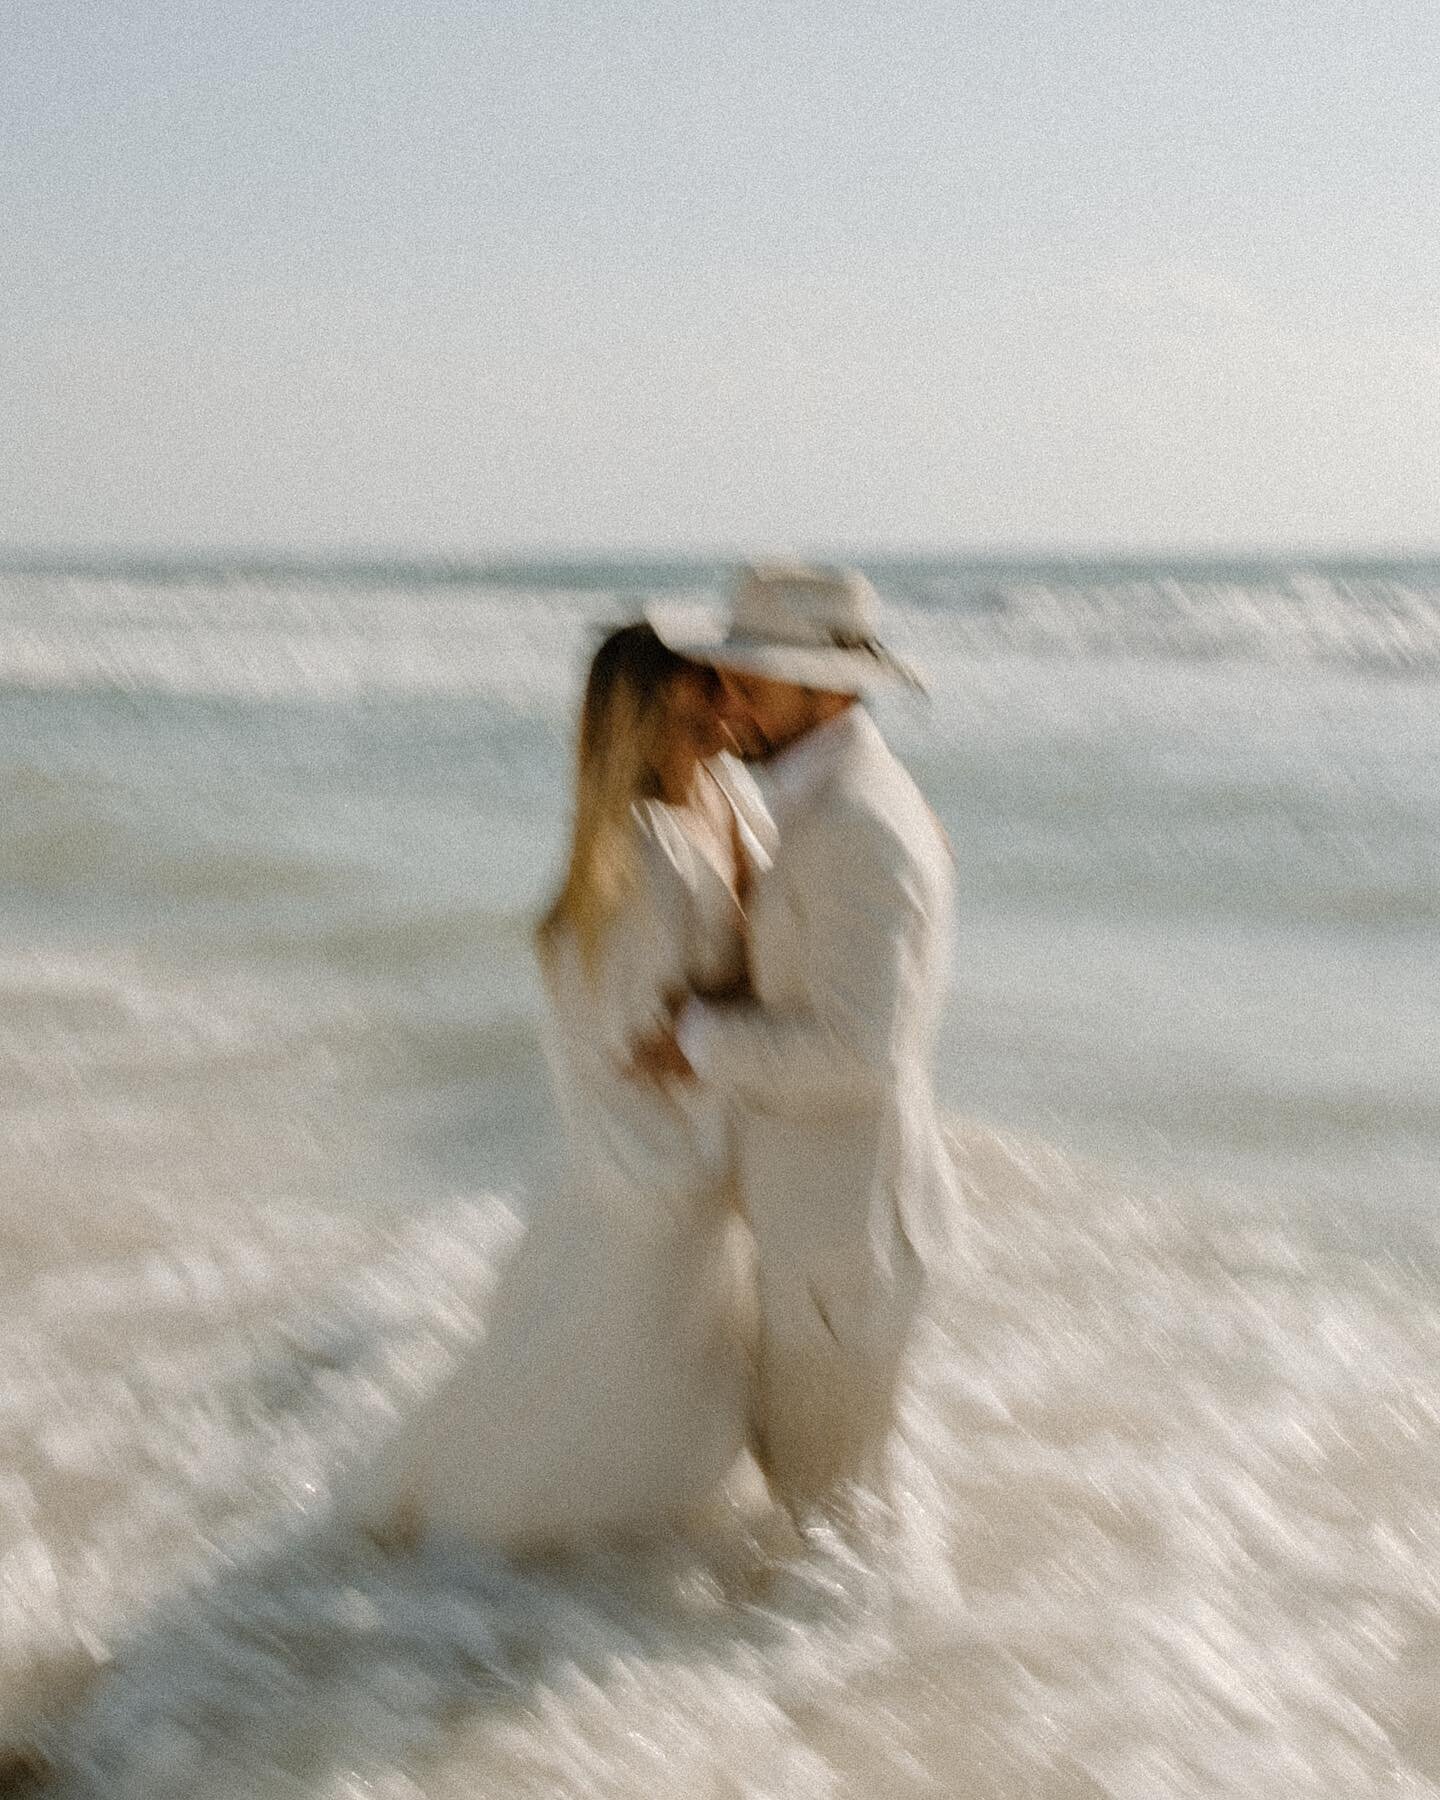 We can&rsquo;t be the only ones obsessed with this blurry photo trend, right? Having some of these in your gallery creates this nostalgic, romantic feeling&mdash;something out of a book.

And it has us curious: what your favorite (or least favorite) 